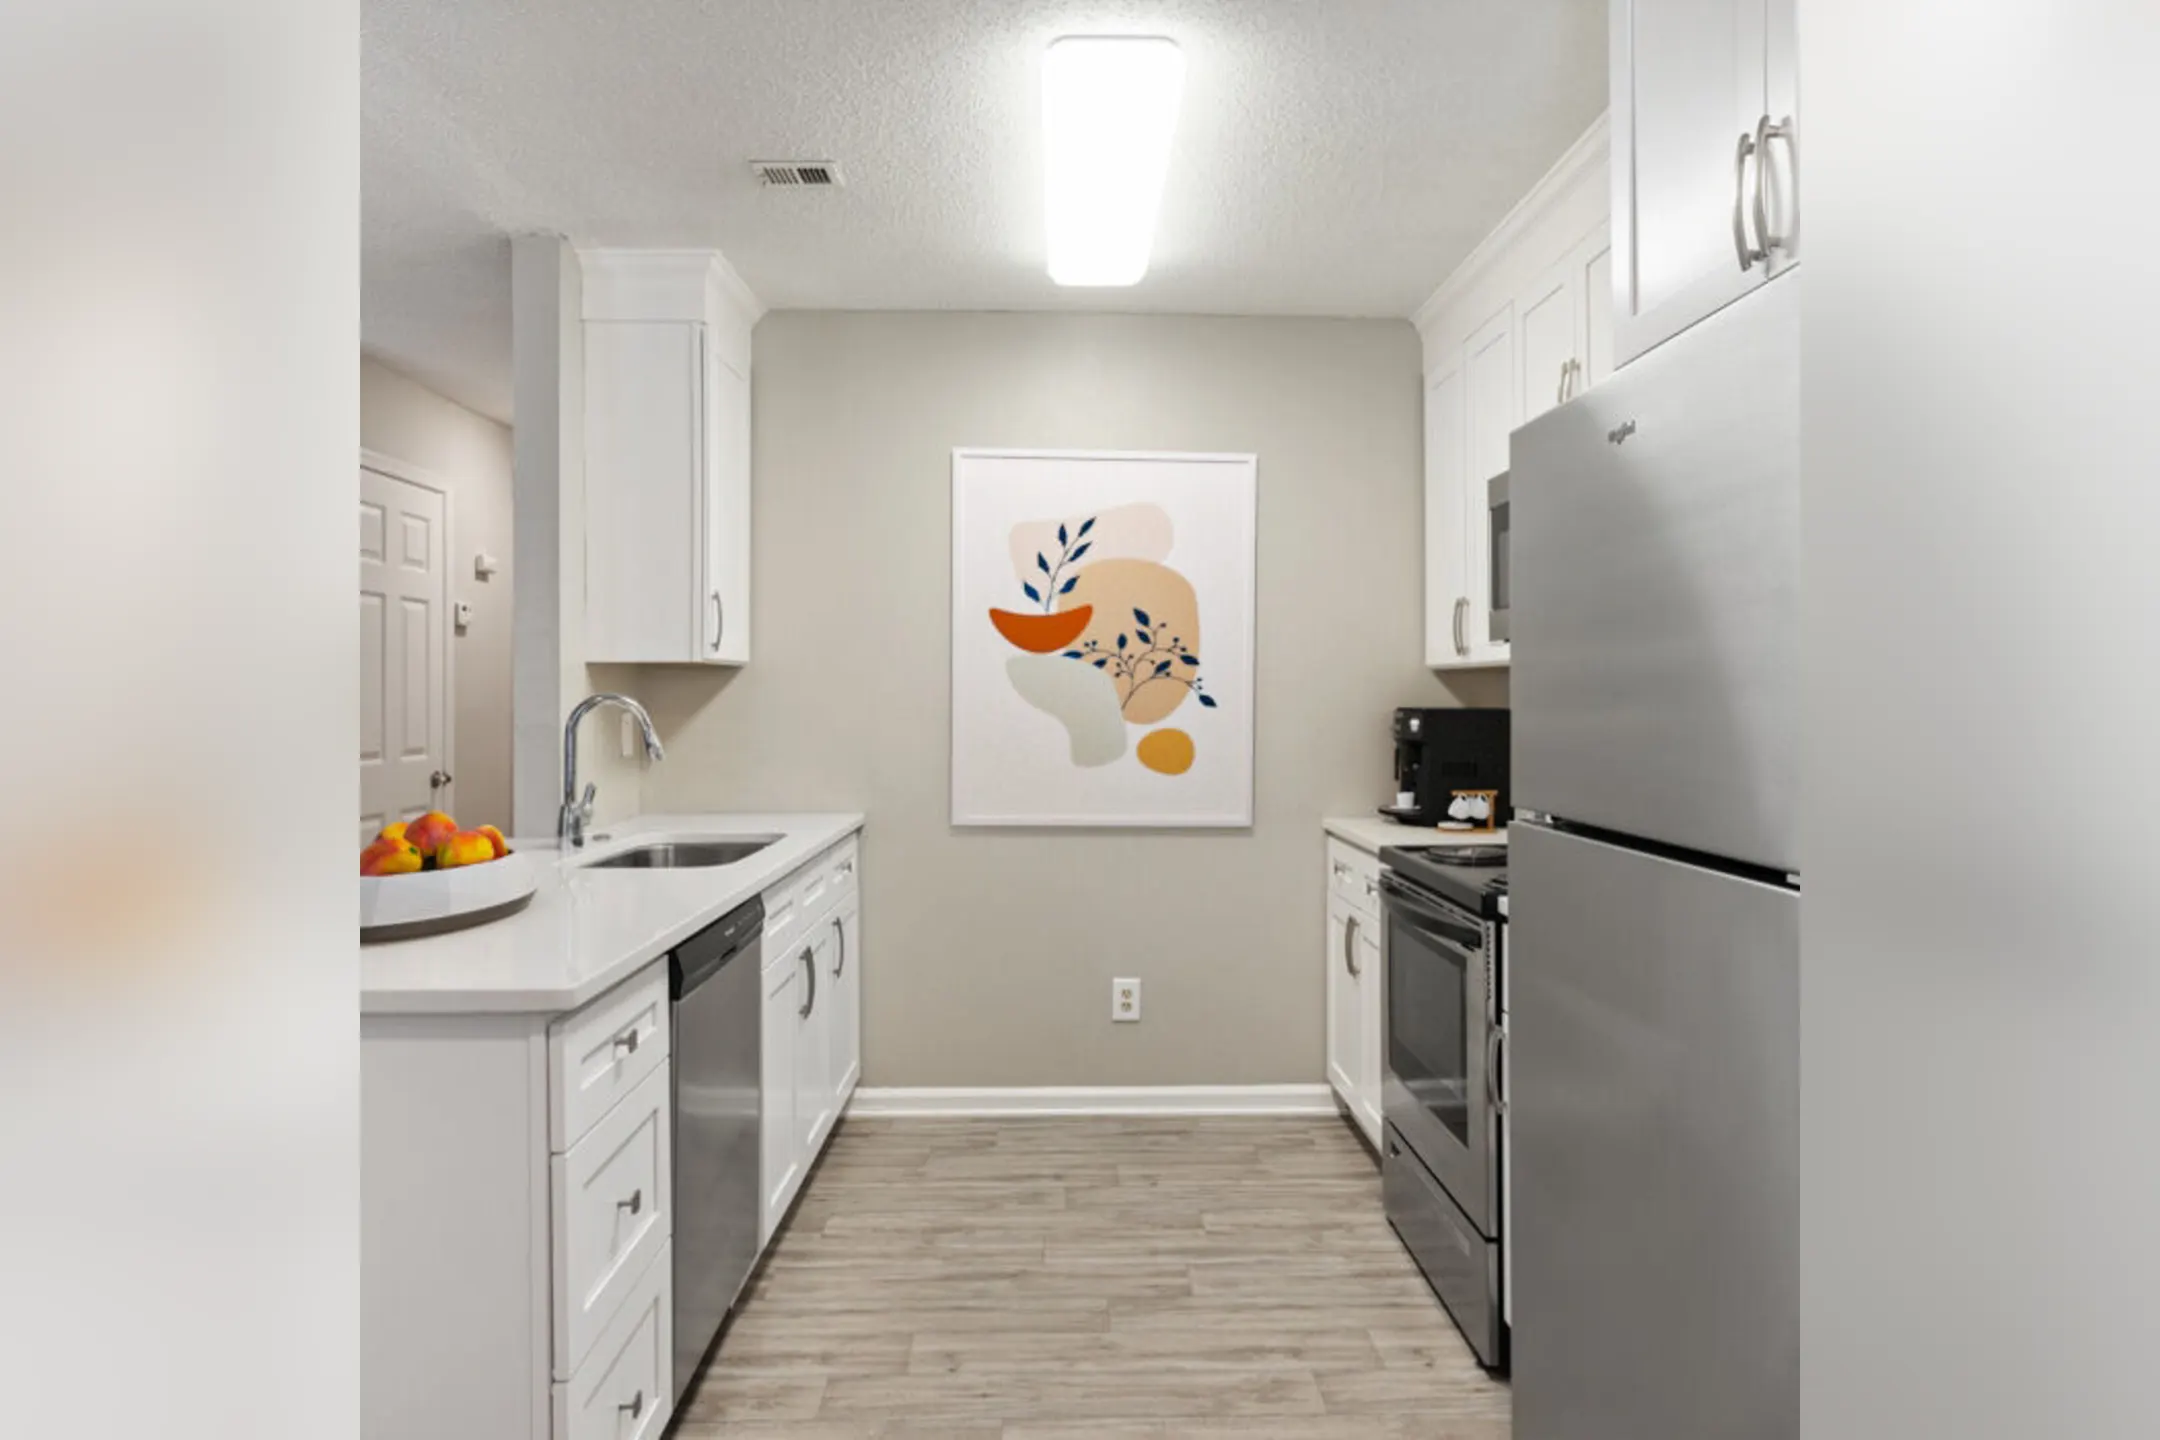 Kitchen - Country Club Apartments - Mooresville, NC